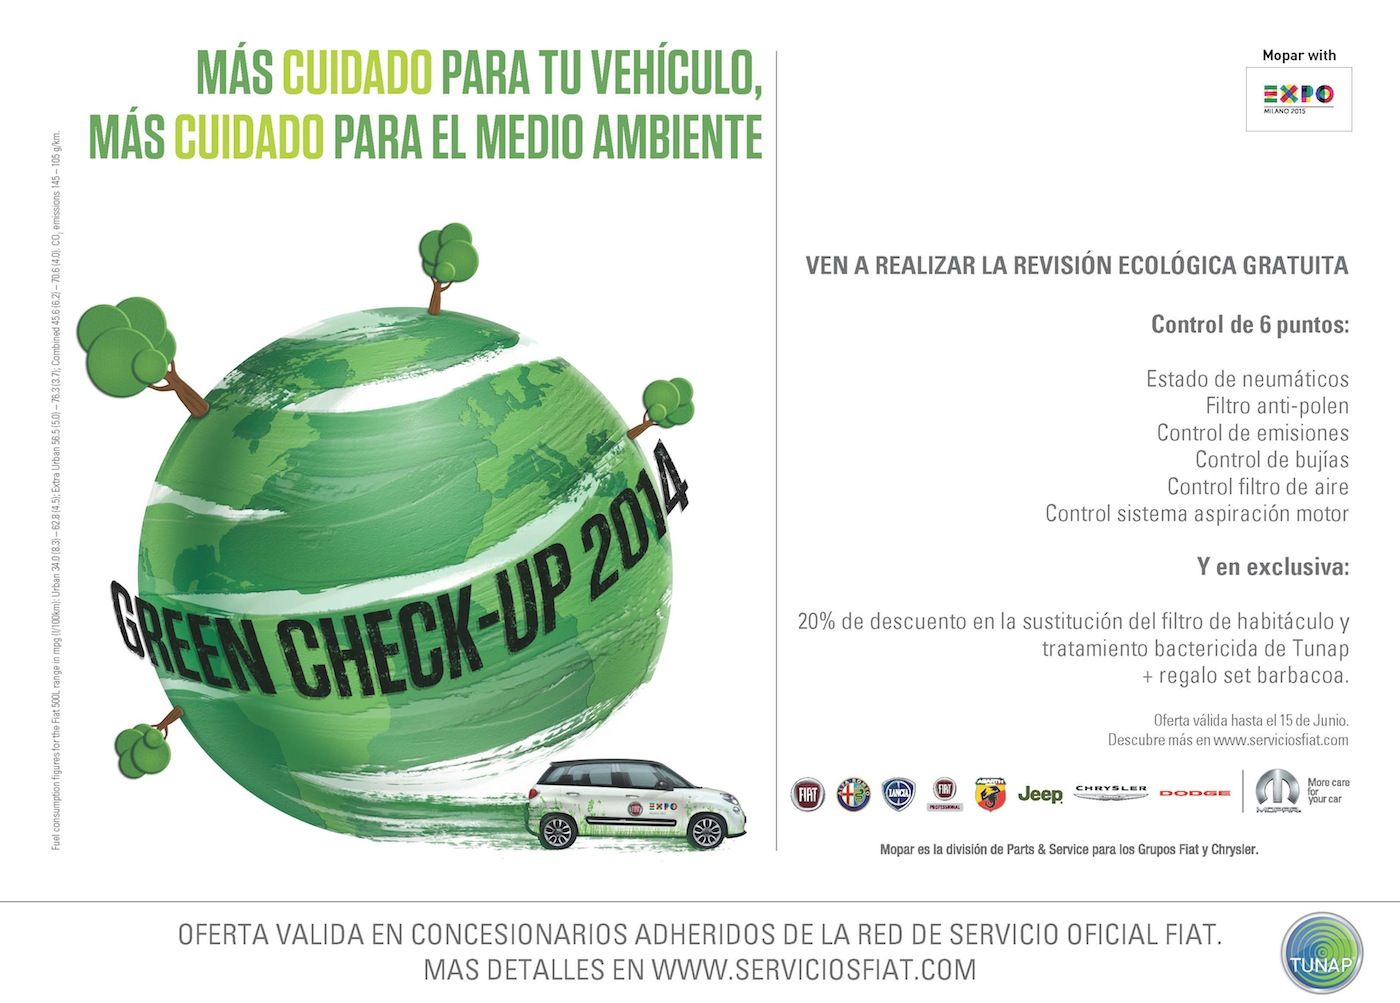 Fiat_Green_Check_Up